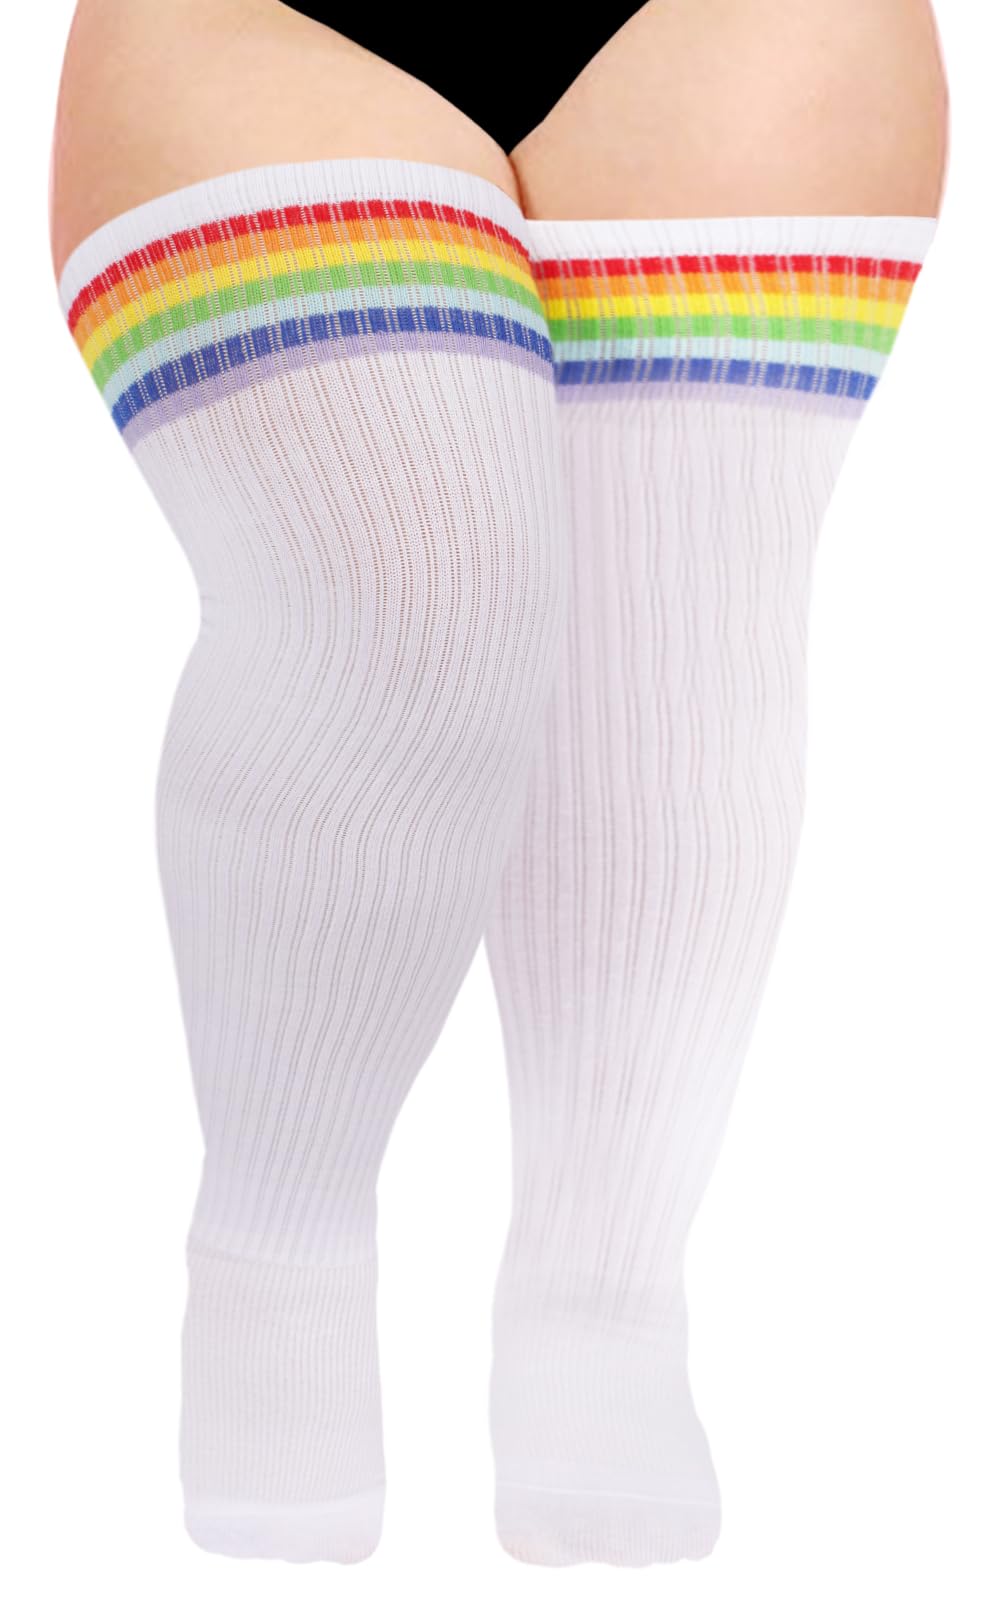 Womens Knit Cotton Extra Long Over the Knee High Socks-White & Rainbow - Moon Wood